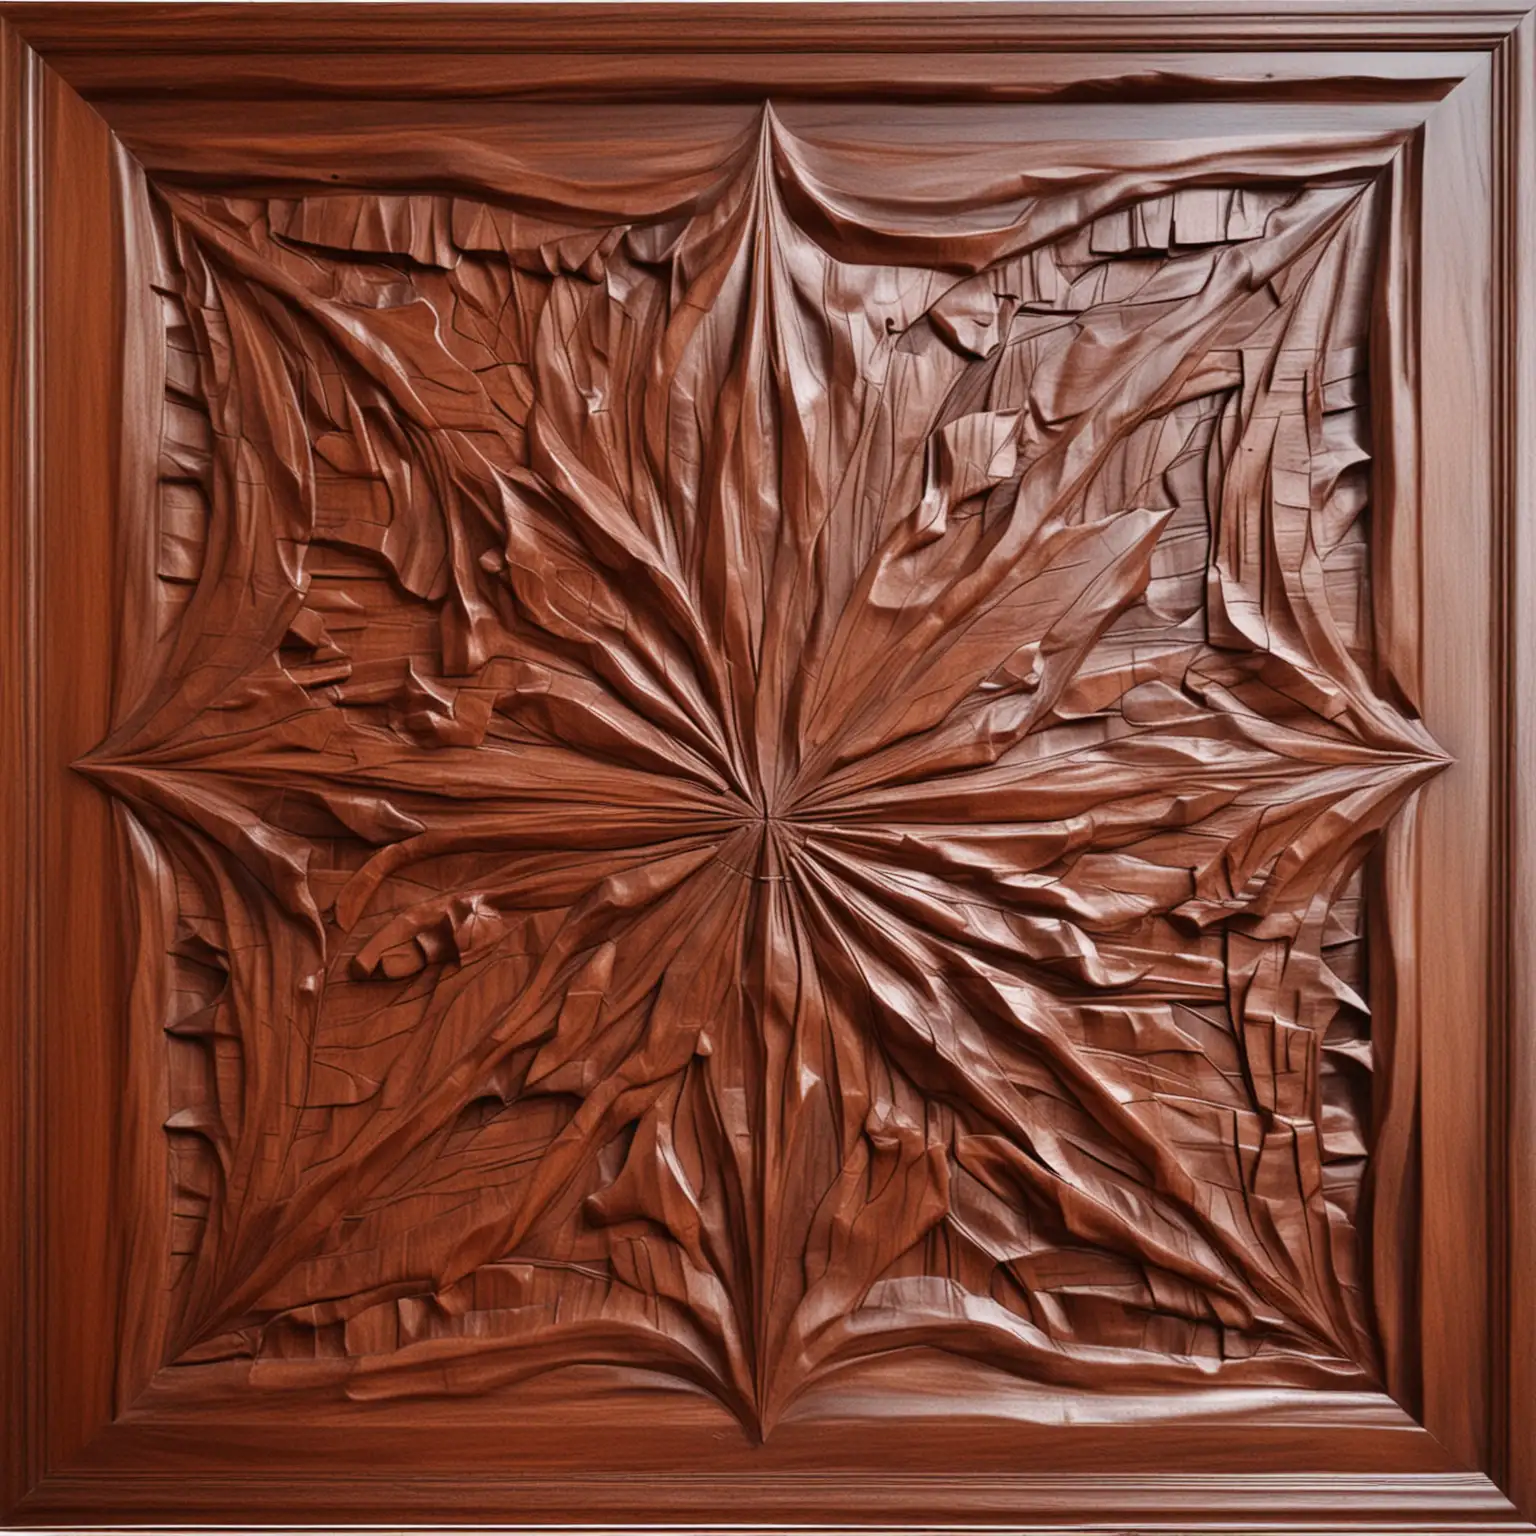 Mahogany Wood Panel Rustic Texture Background for Design Projects